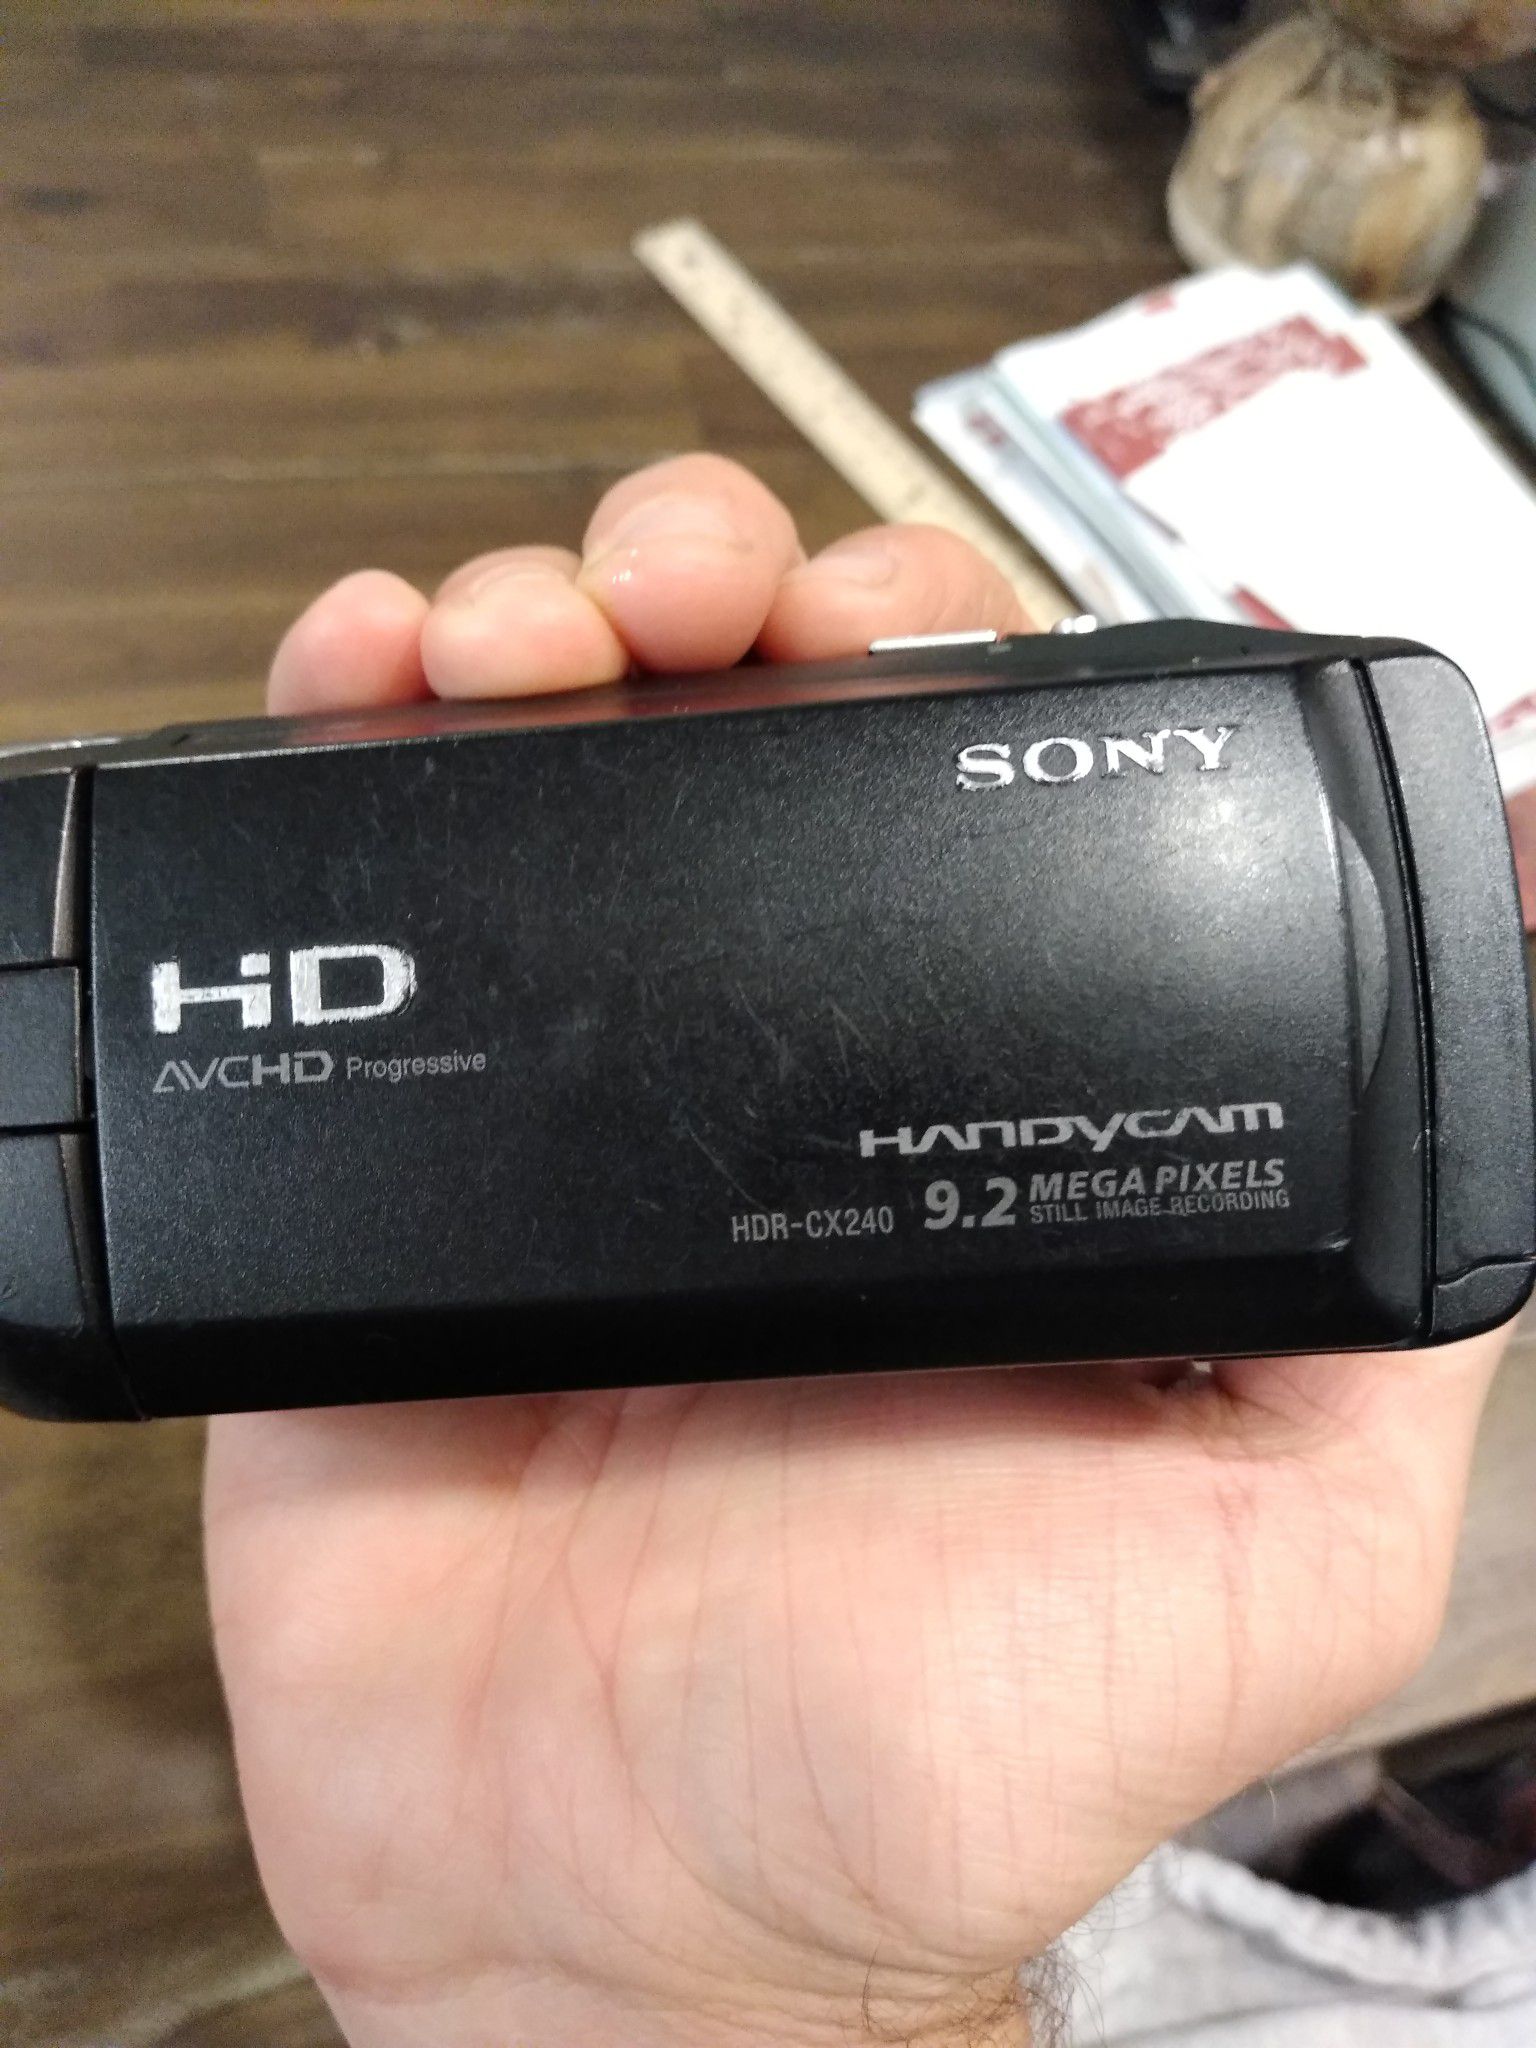 Sony Handy Cam Camcorder have a good stand too.